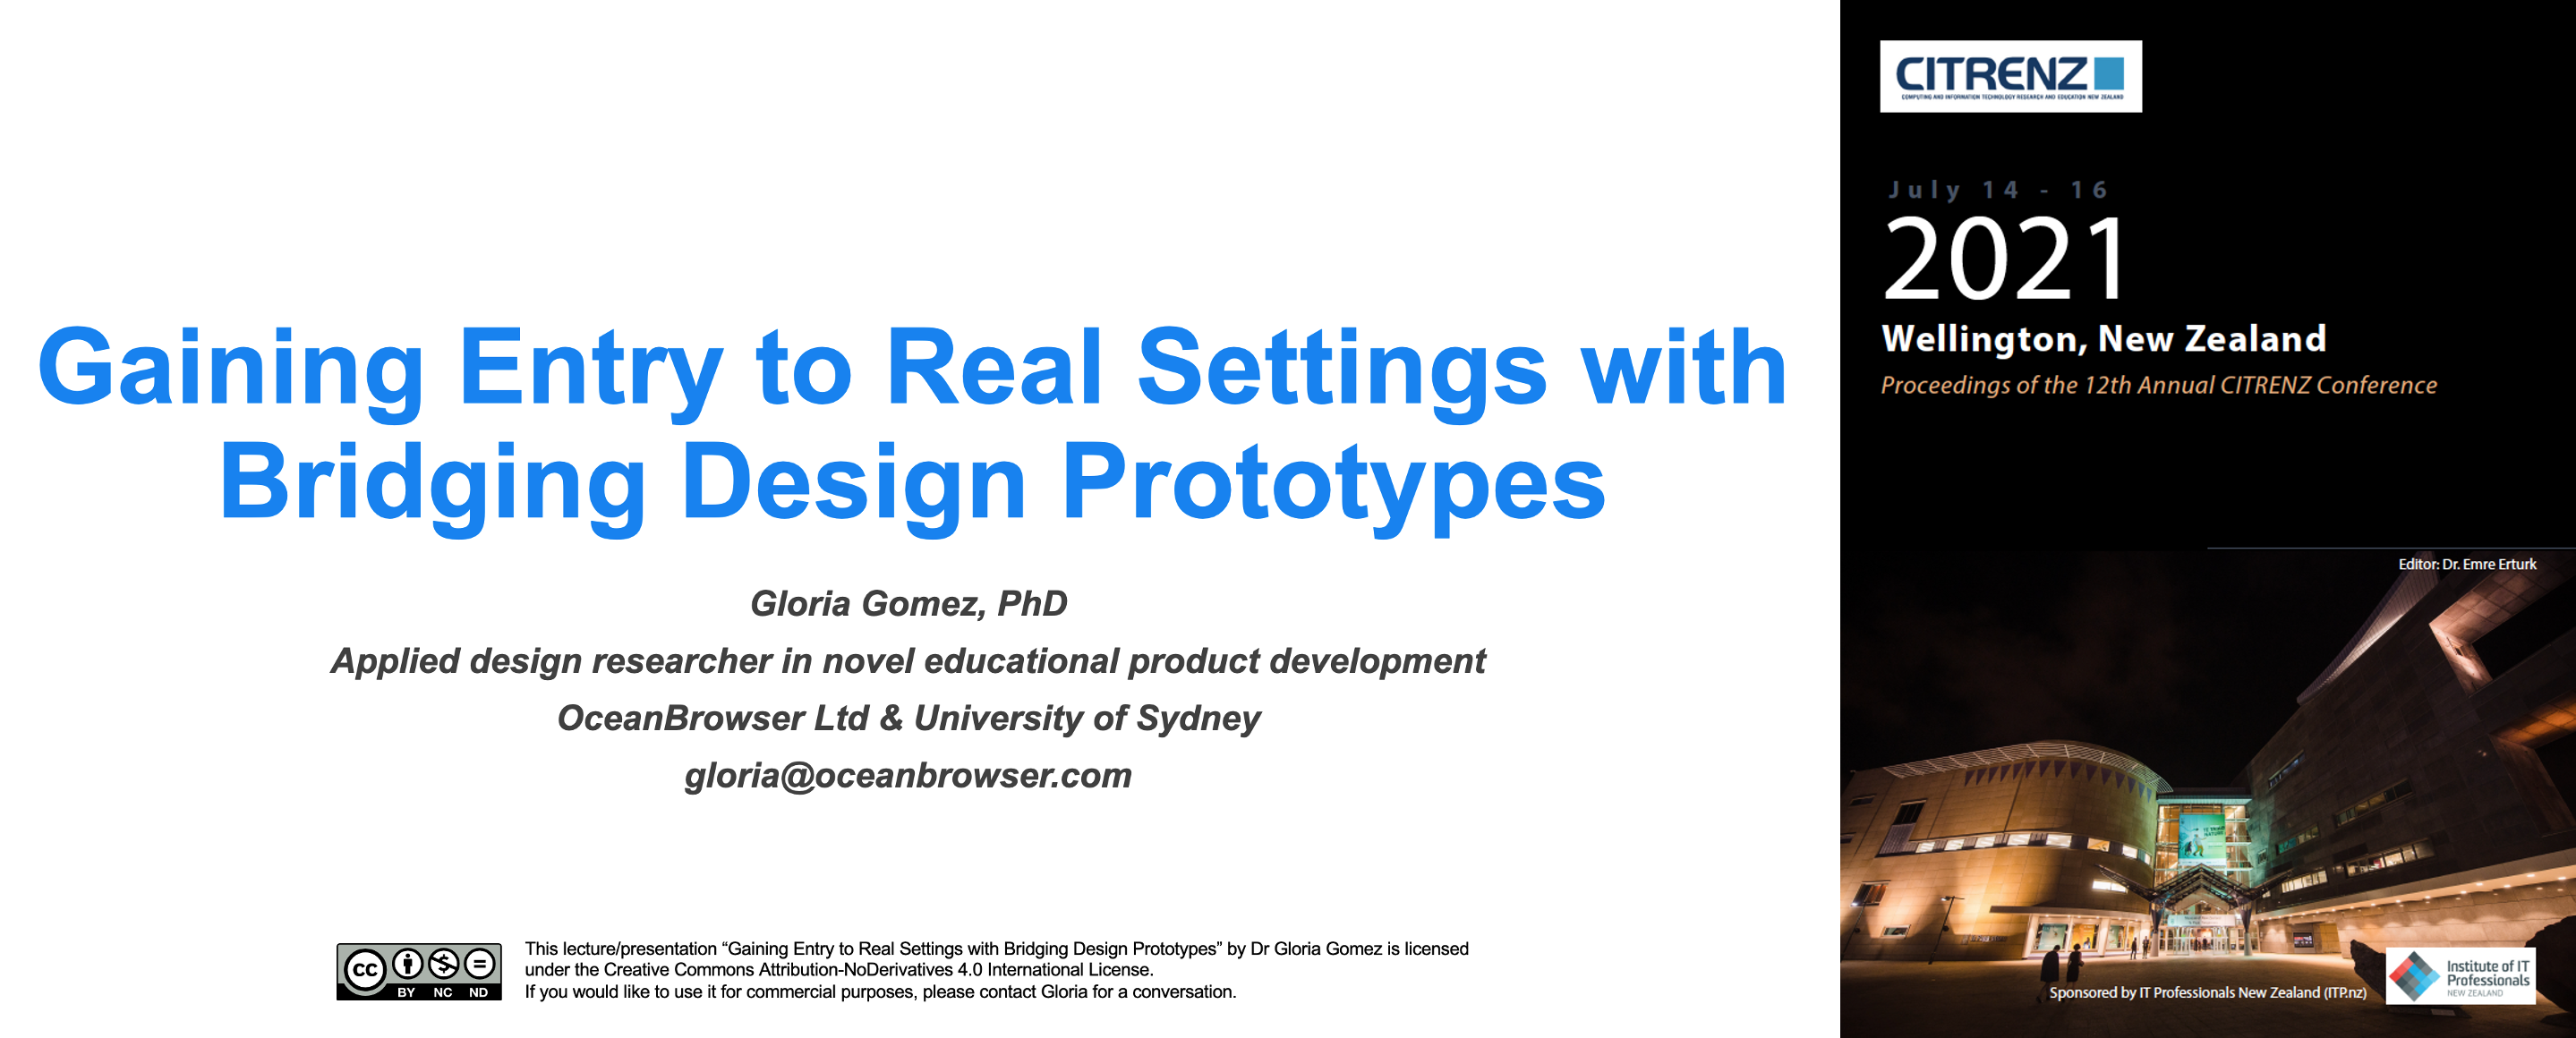 cover-audiorecording-talk/workshop on the Bridging Design Prototype Approach